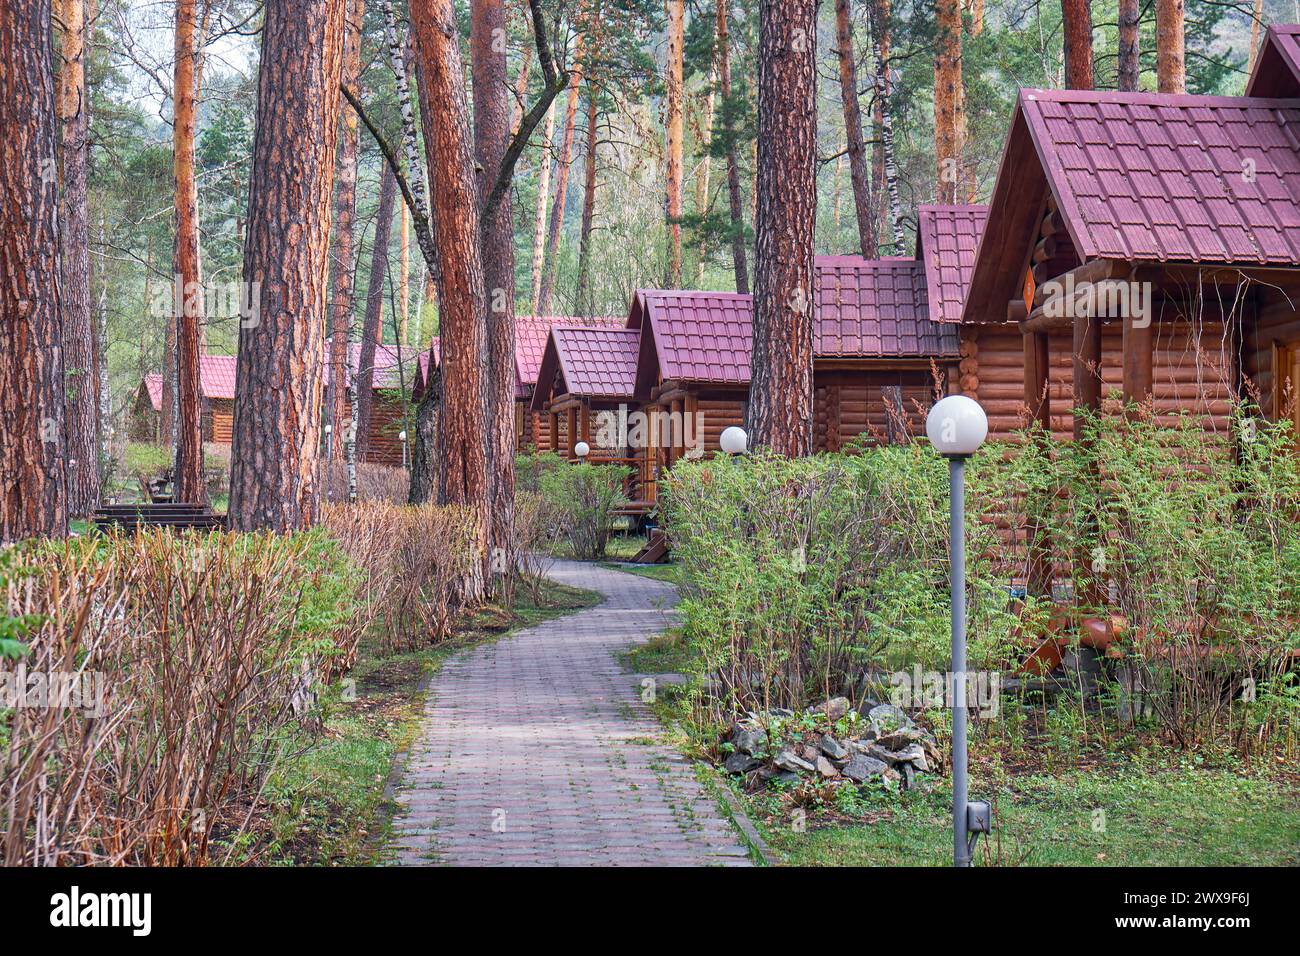 Tourist camping in Altai pine forest. Wooden houses - bungalows along a forest path with lanterns. Recreational tourist area. Stock Photo